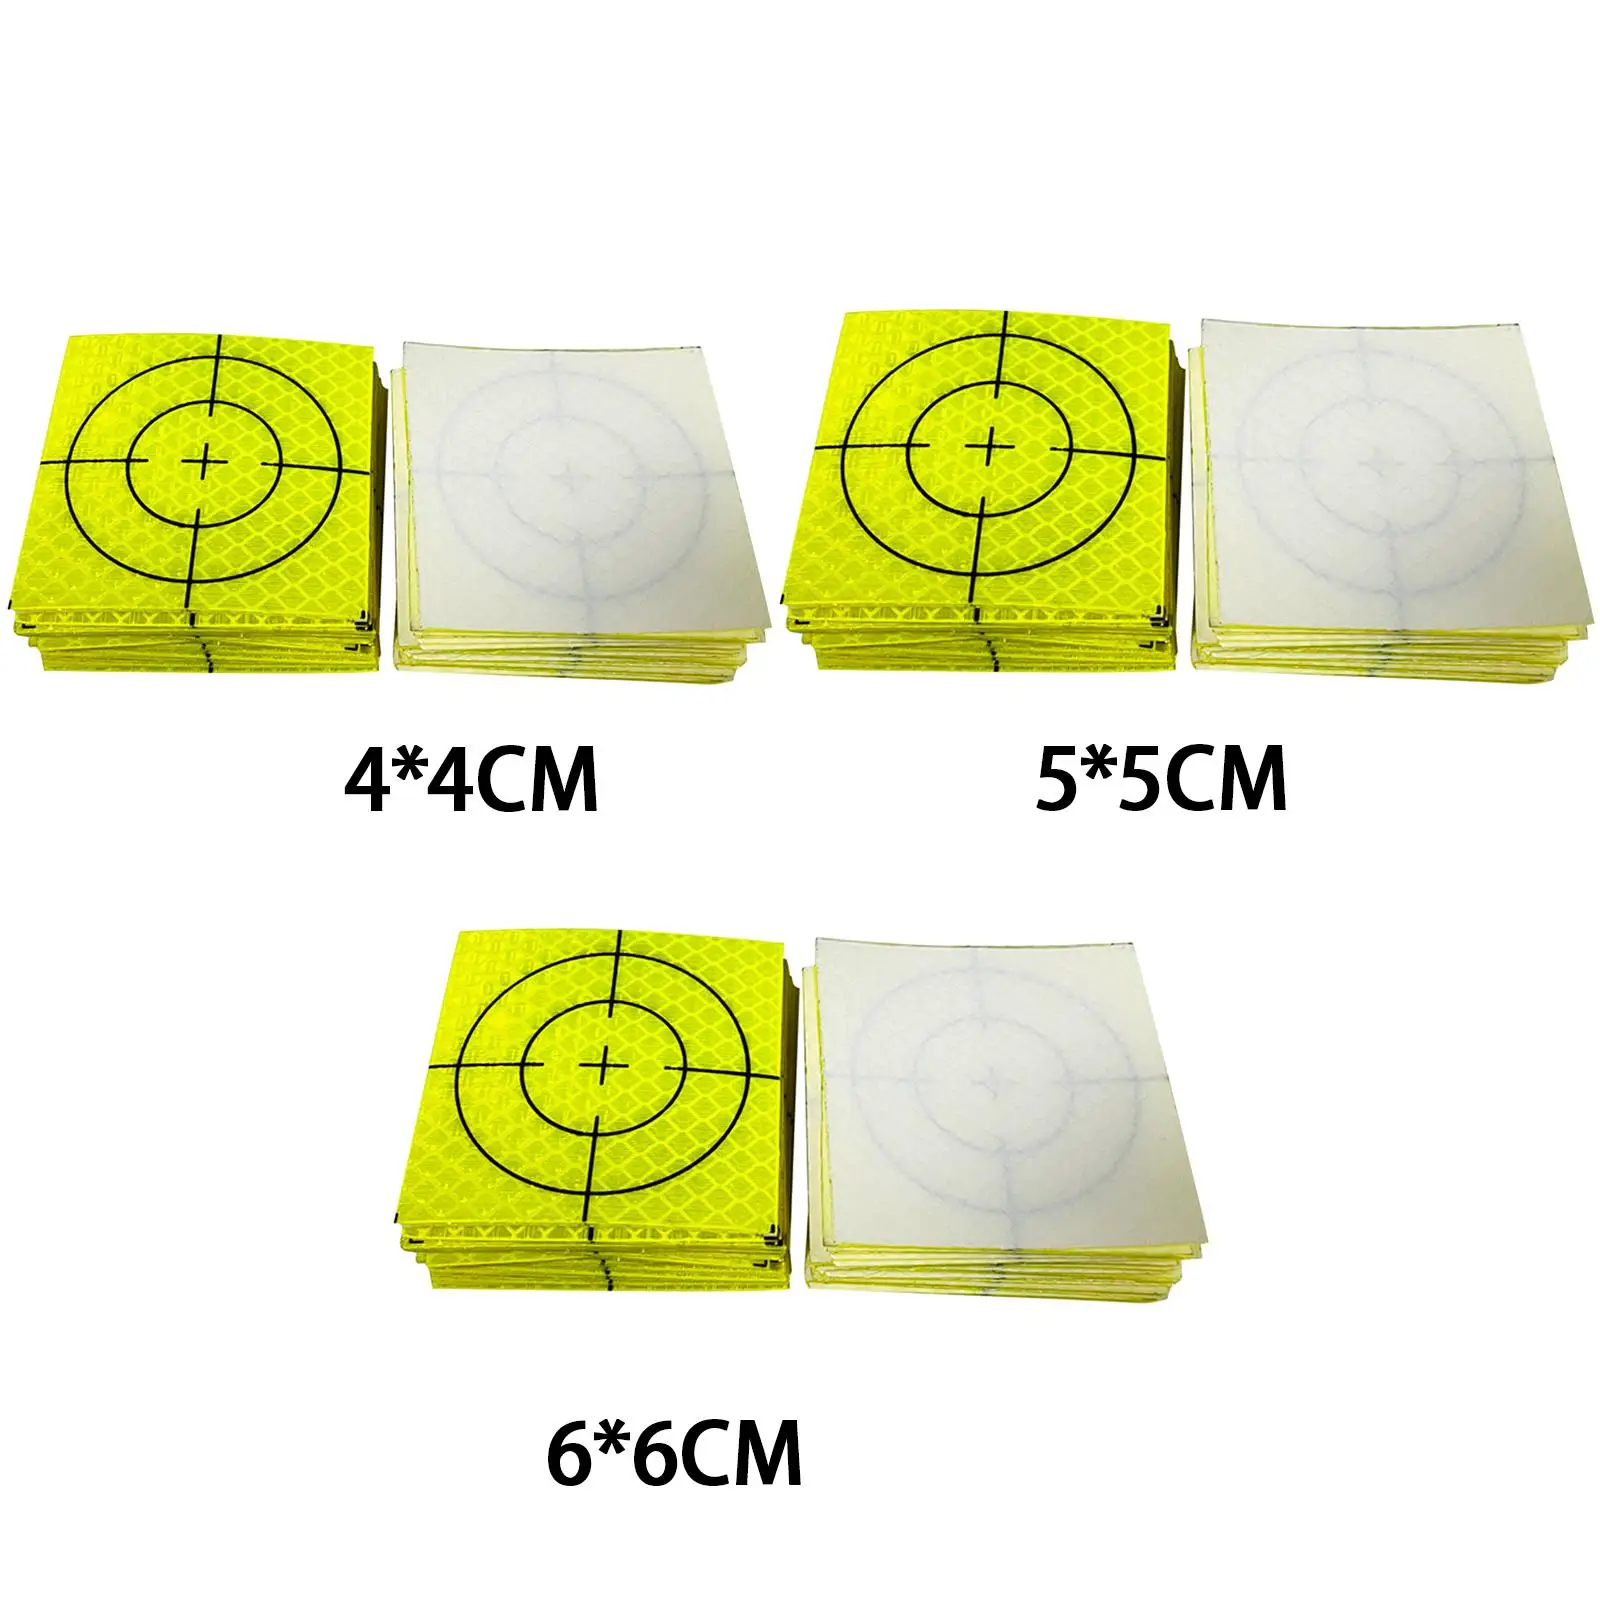 100Pcs Acrylic Reflective Tape Survey Targets Reflector Target Sheets for Tunnel Engineering Bridge Engineering Ship Inspection